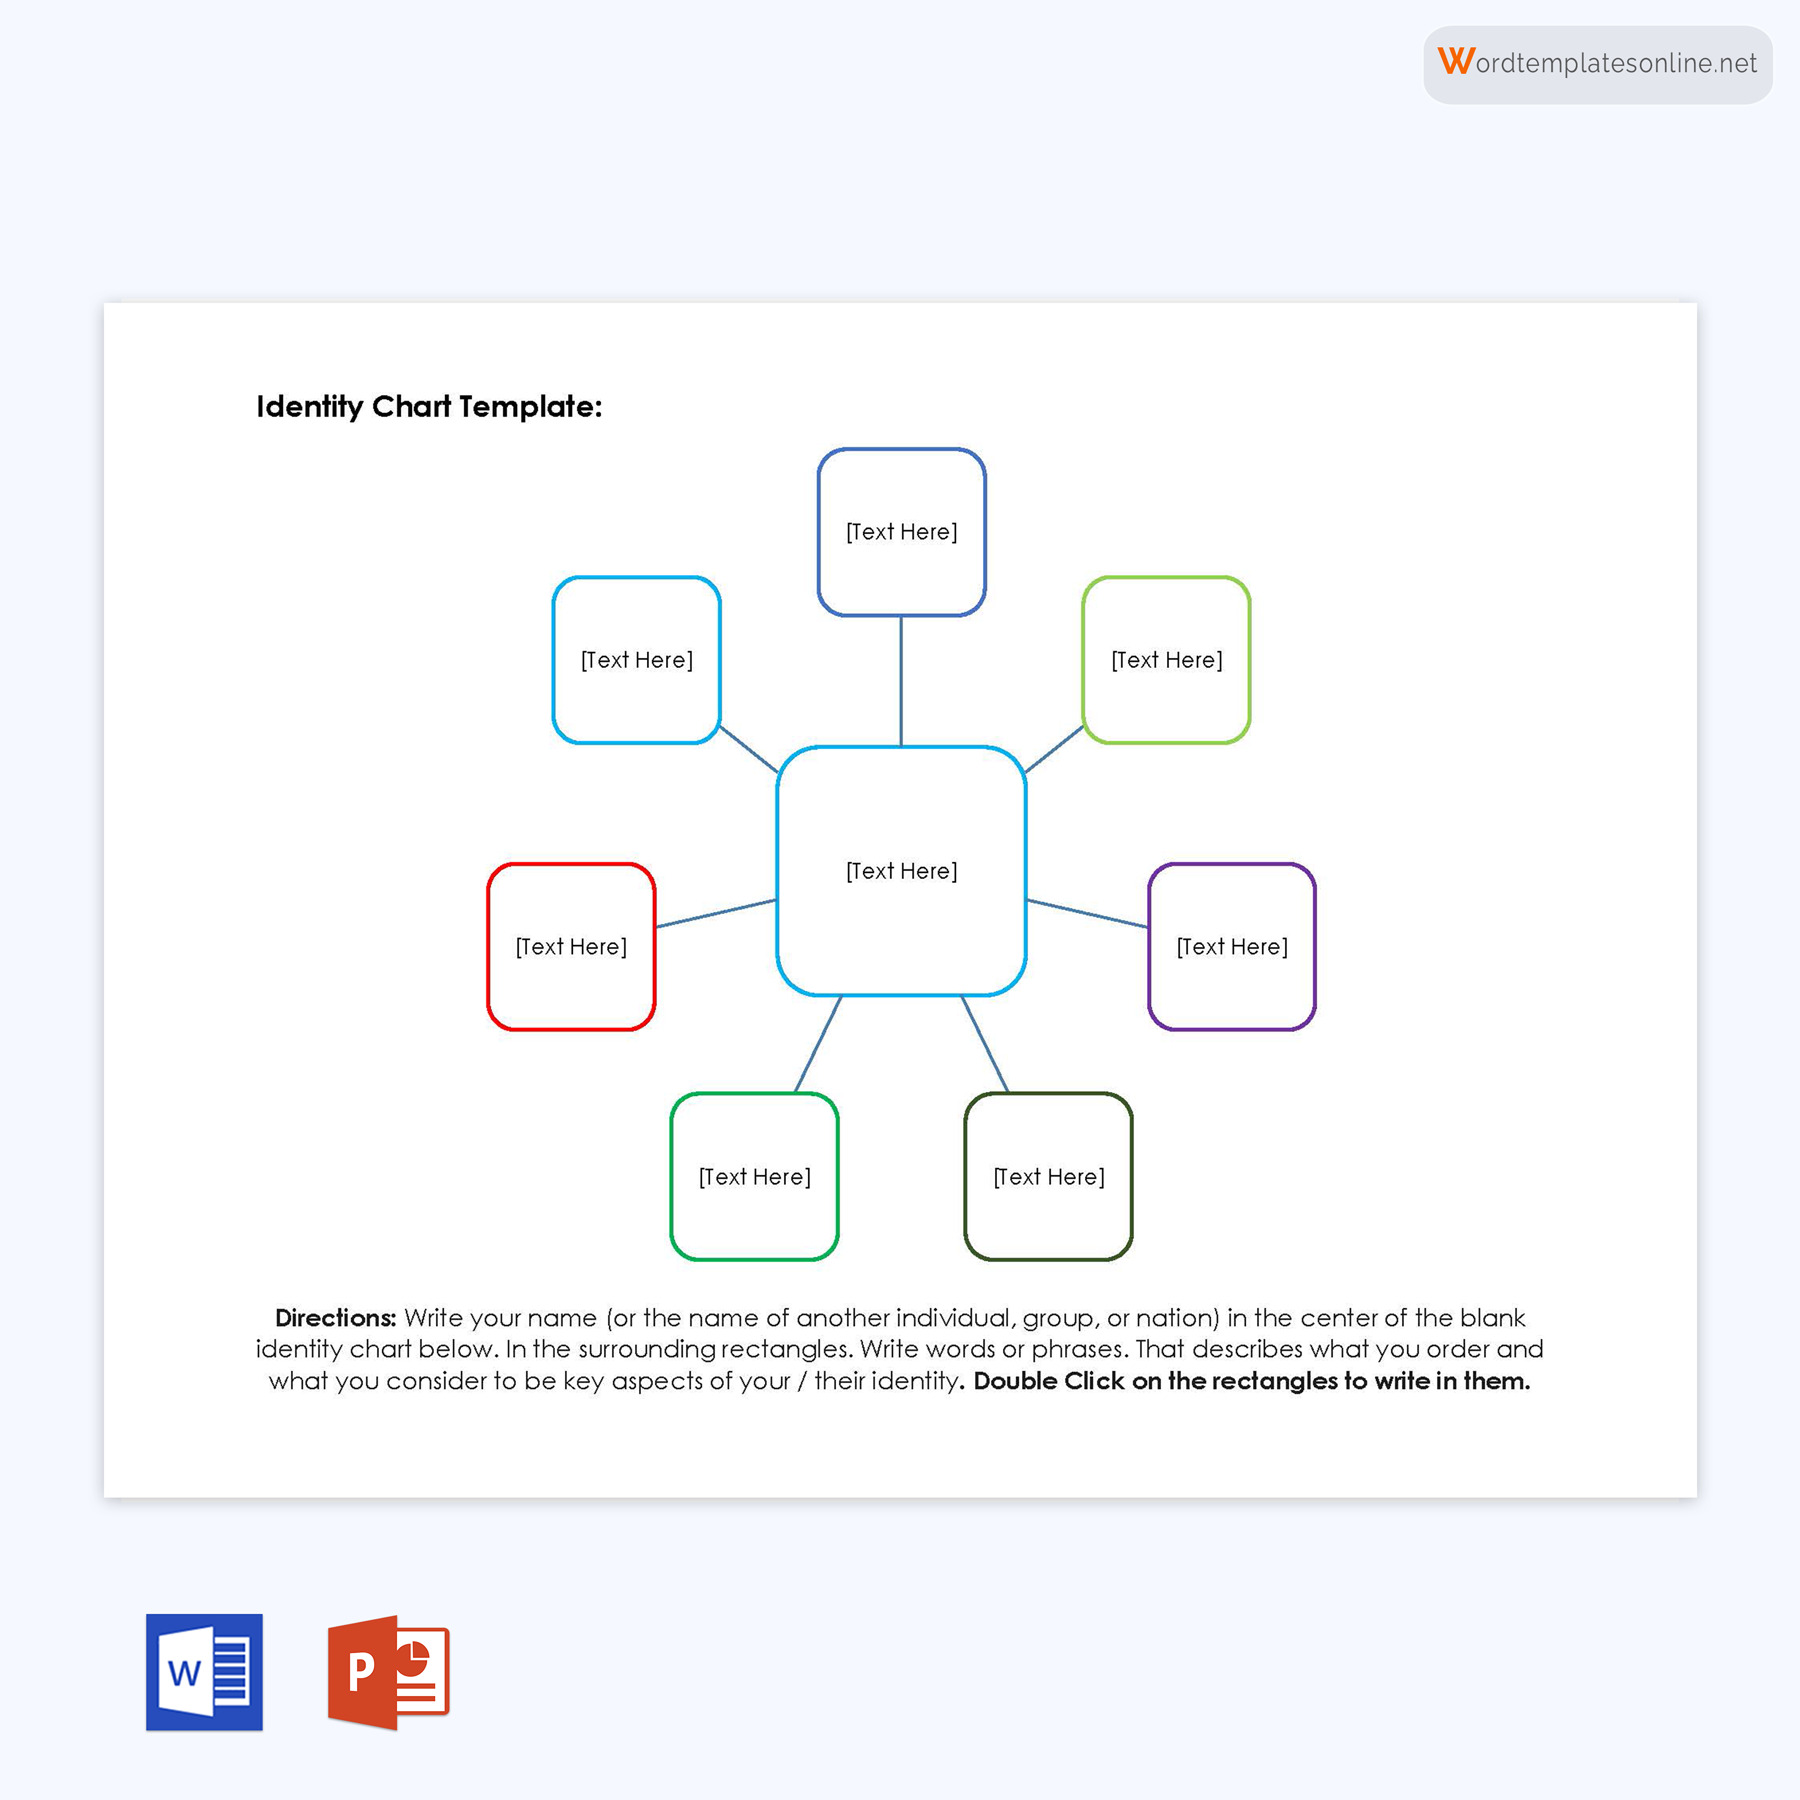 Identity Chart Template PowerPoint